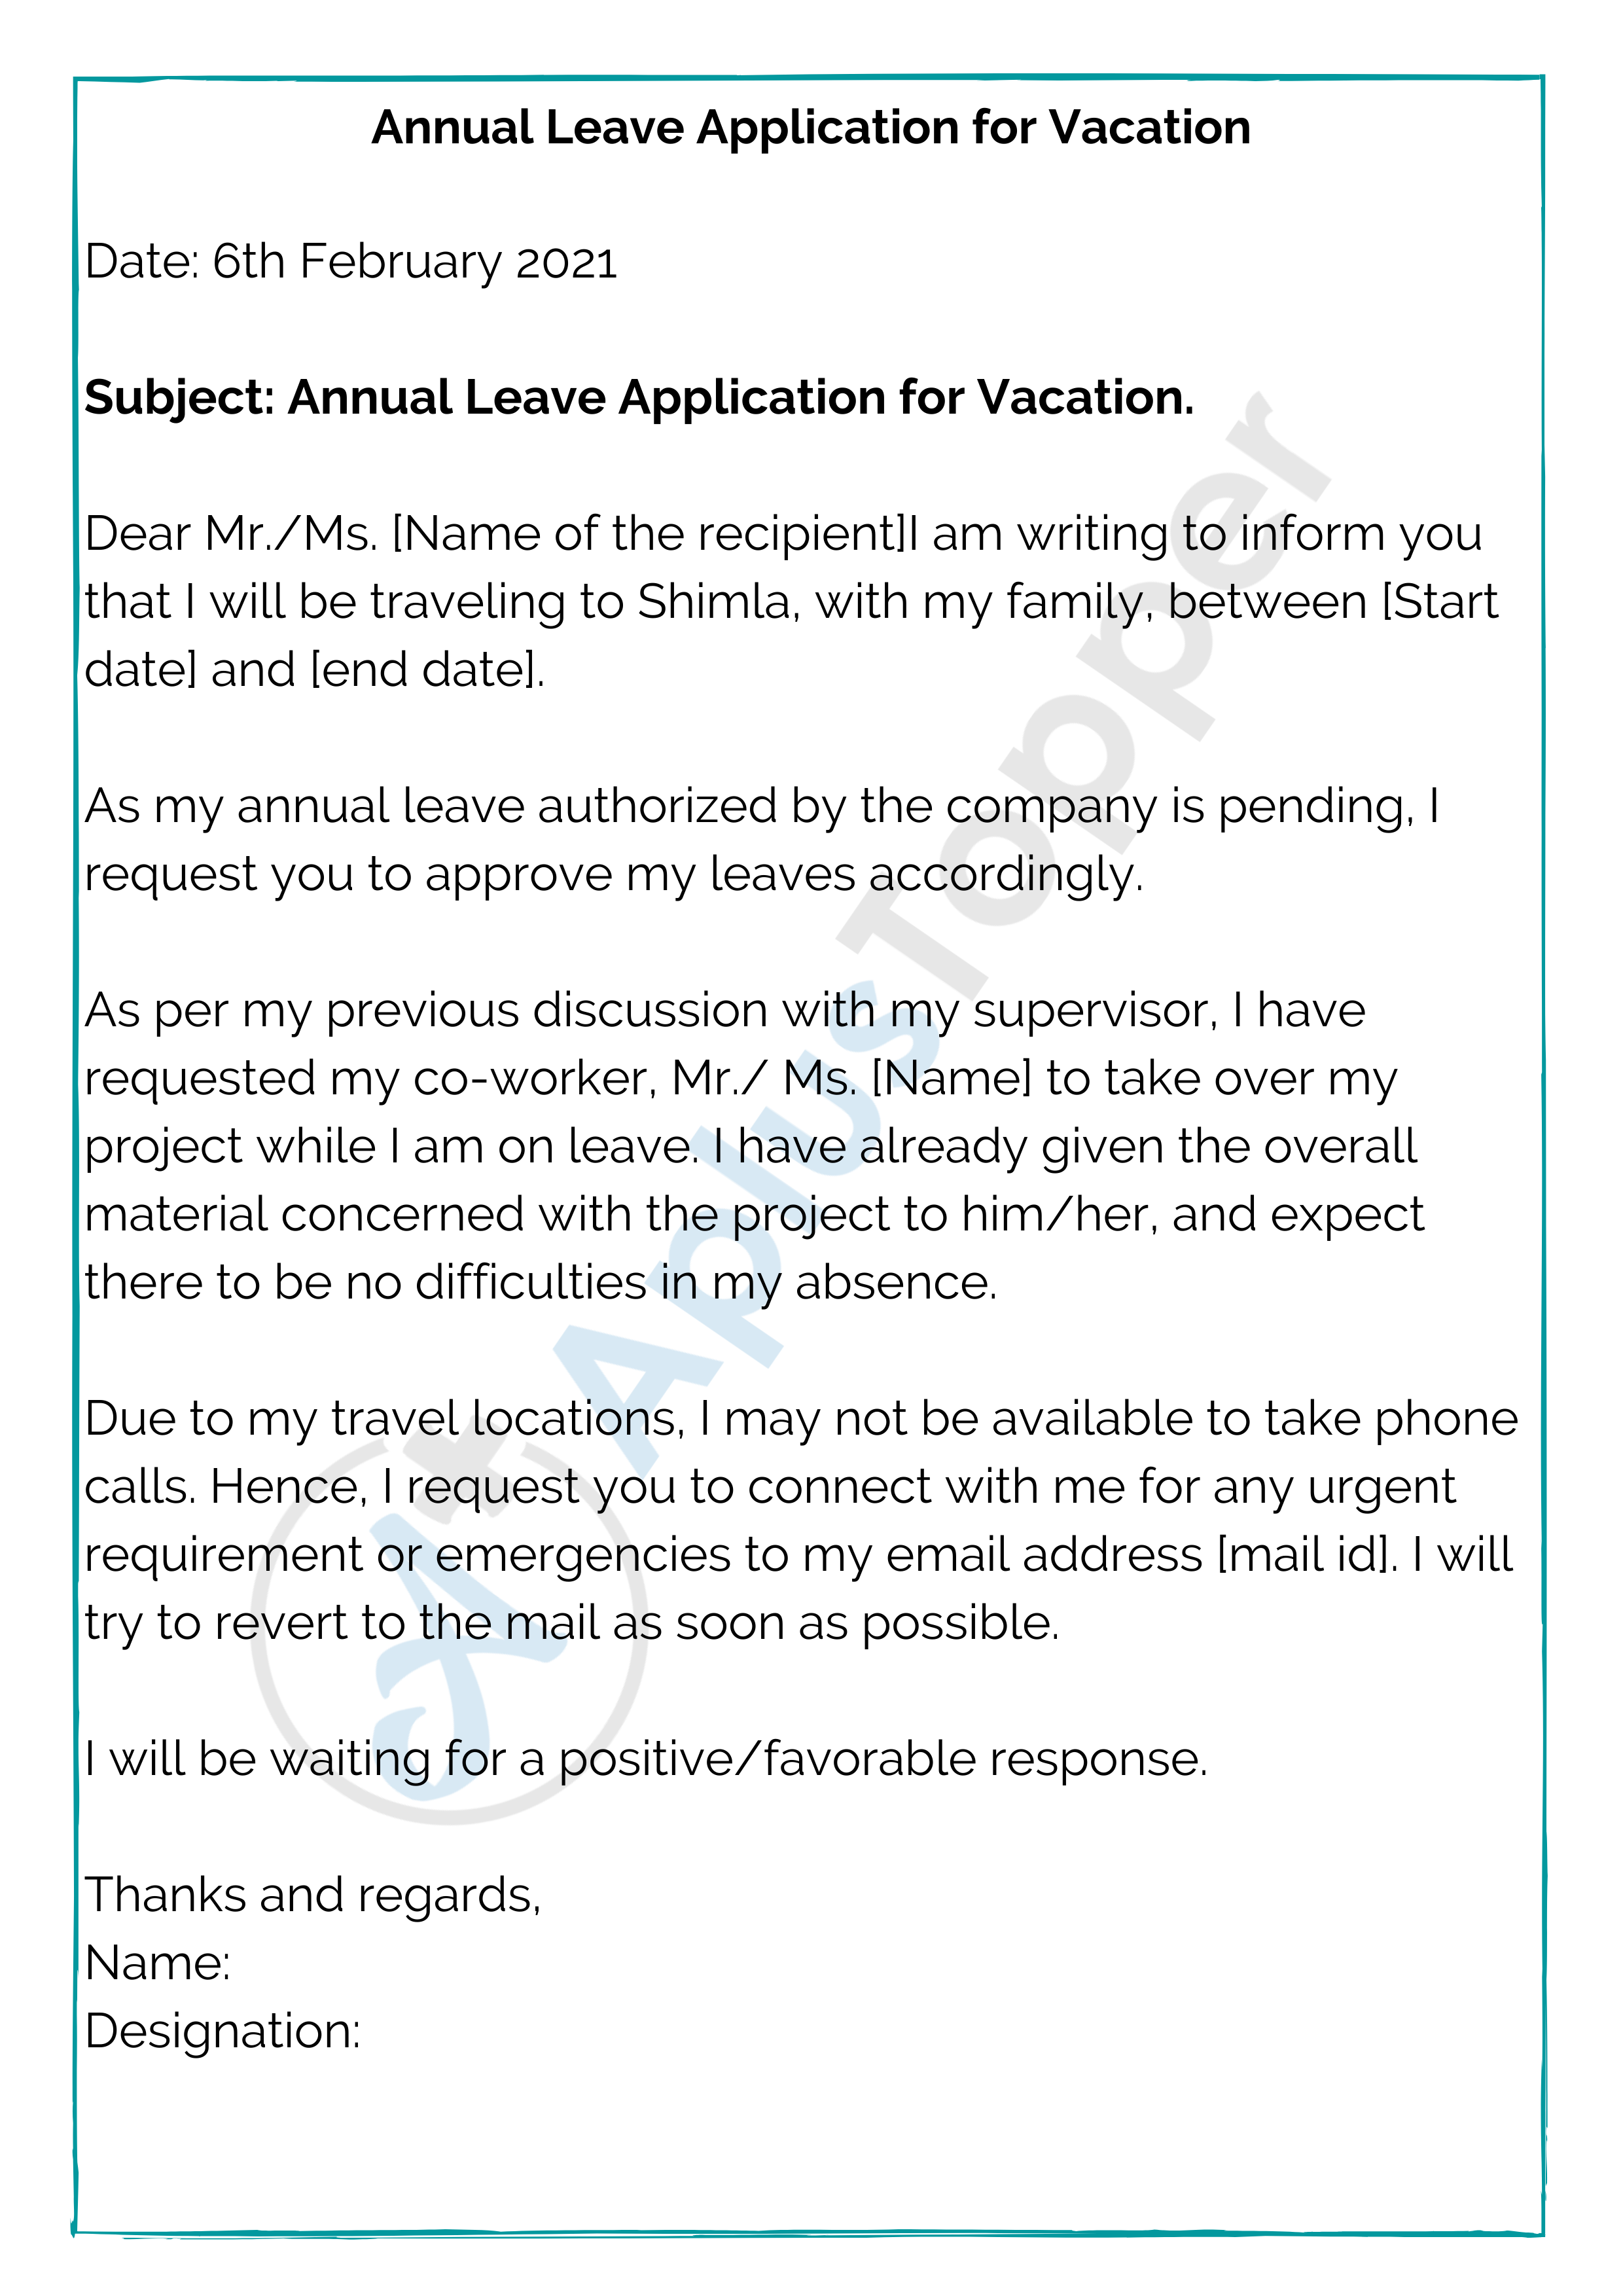 how to write an application letter for annual leave